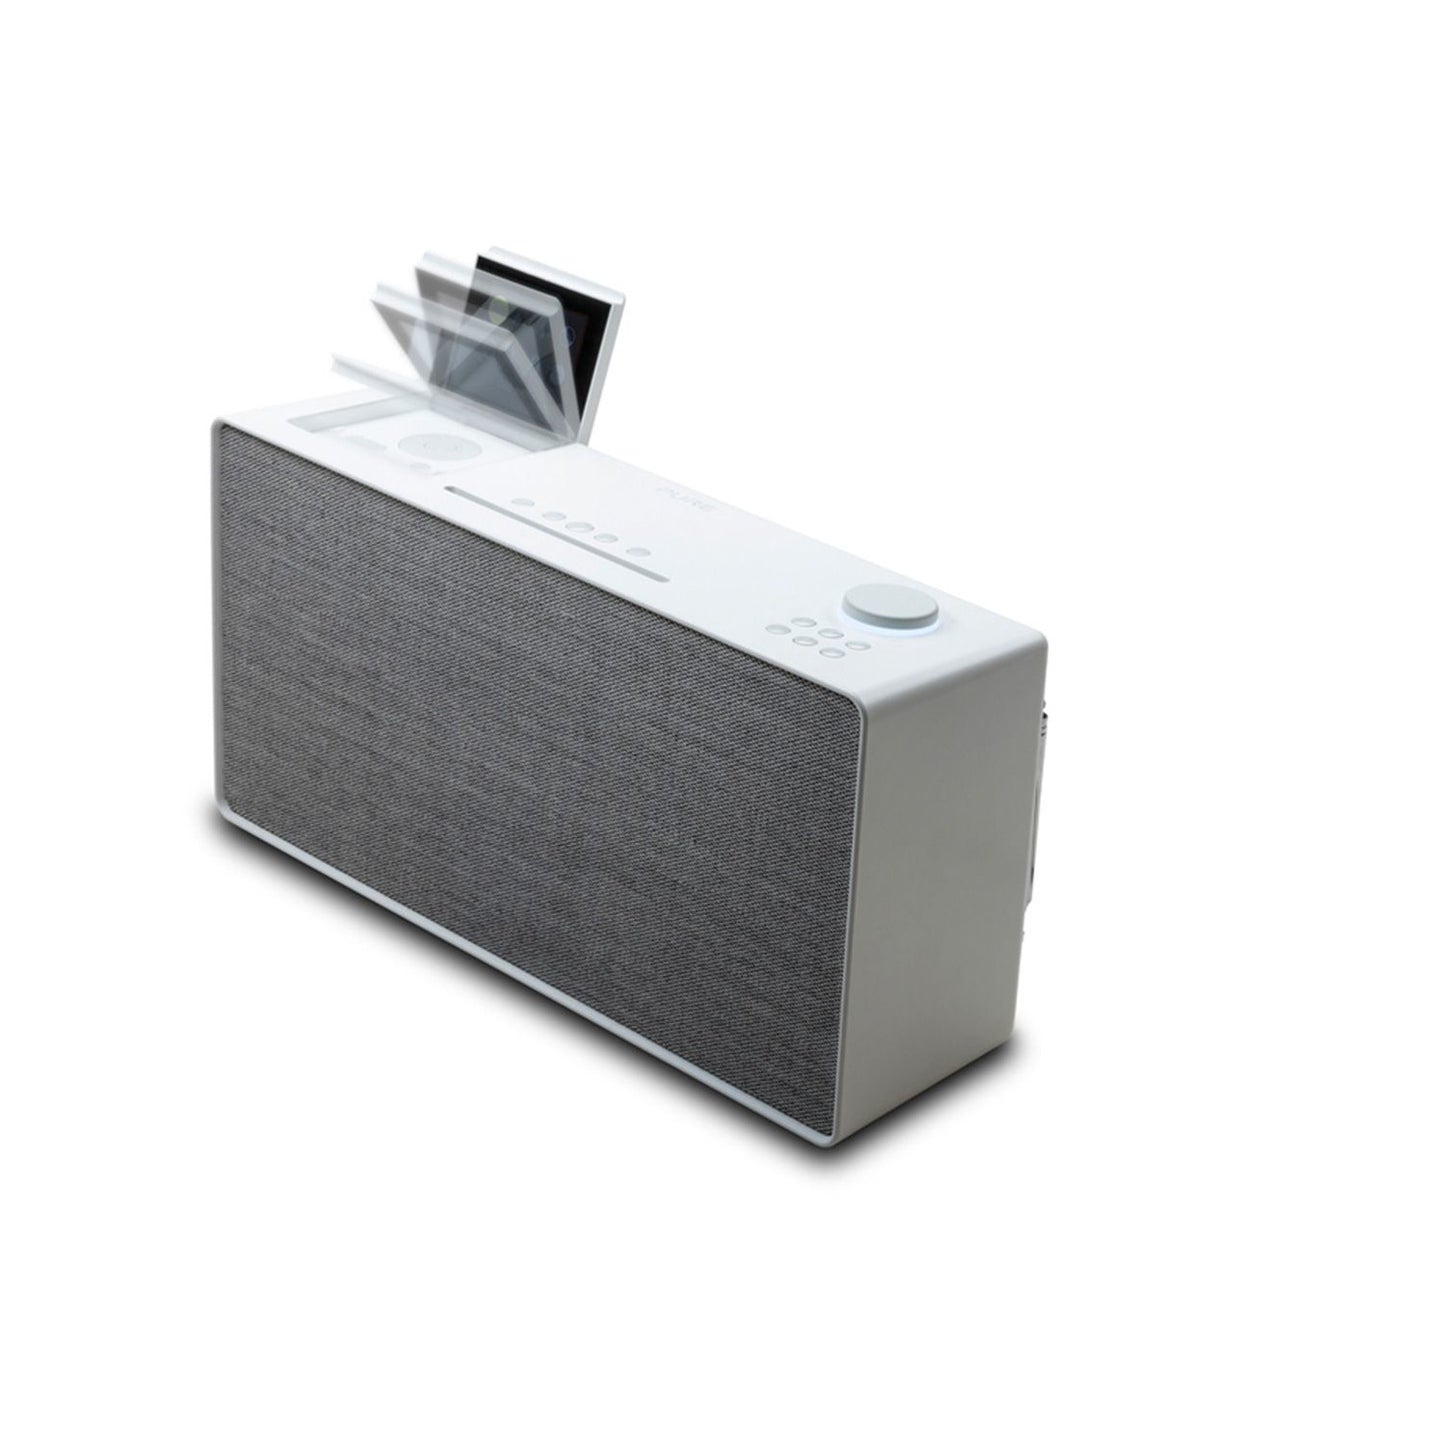 Pure Evoke Home | All-in-one Music System